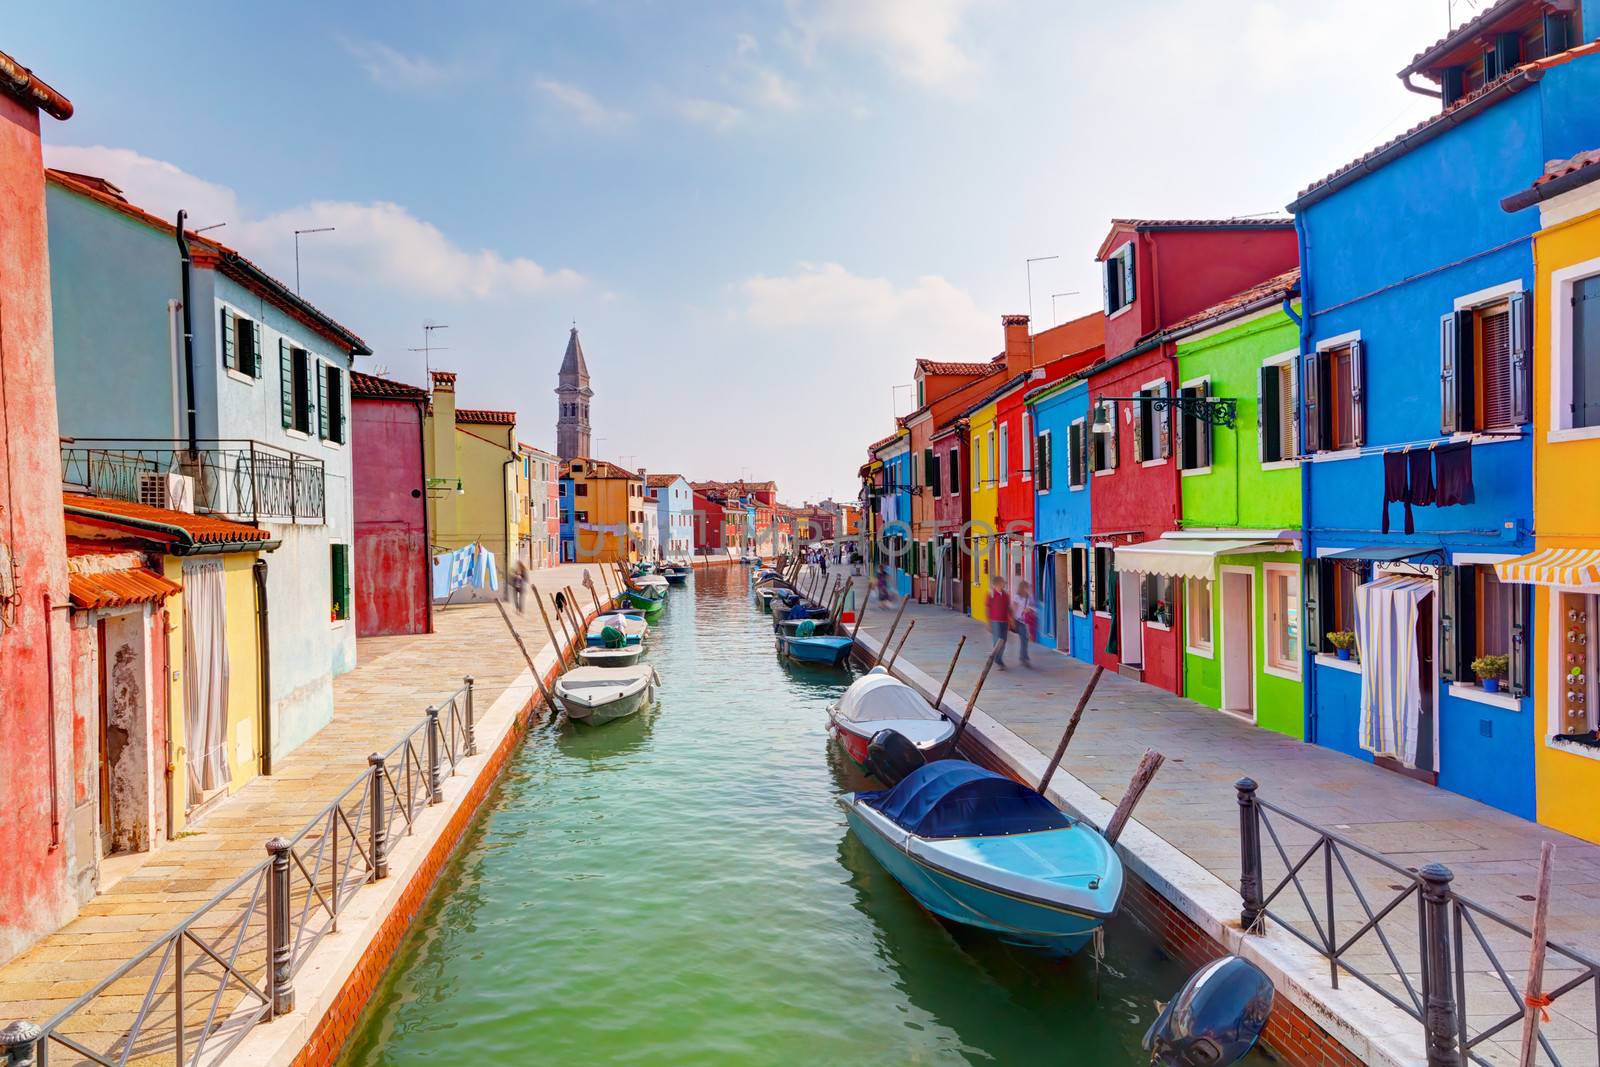 Colorful houses and canal on Burano island, near Venice, Italy. Sunny day.